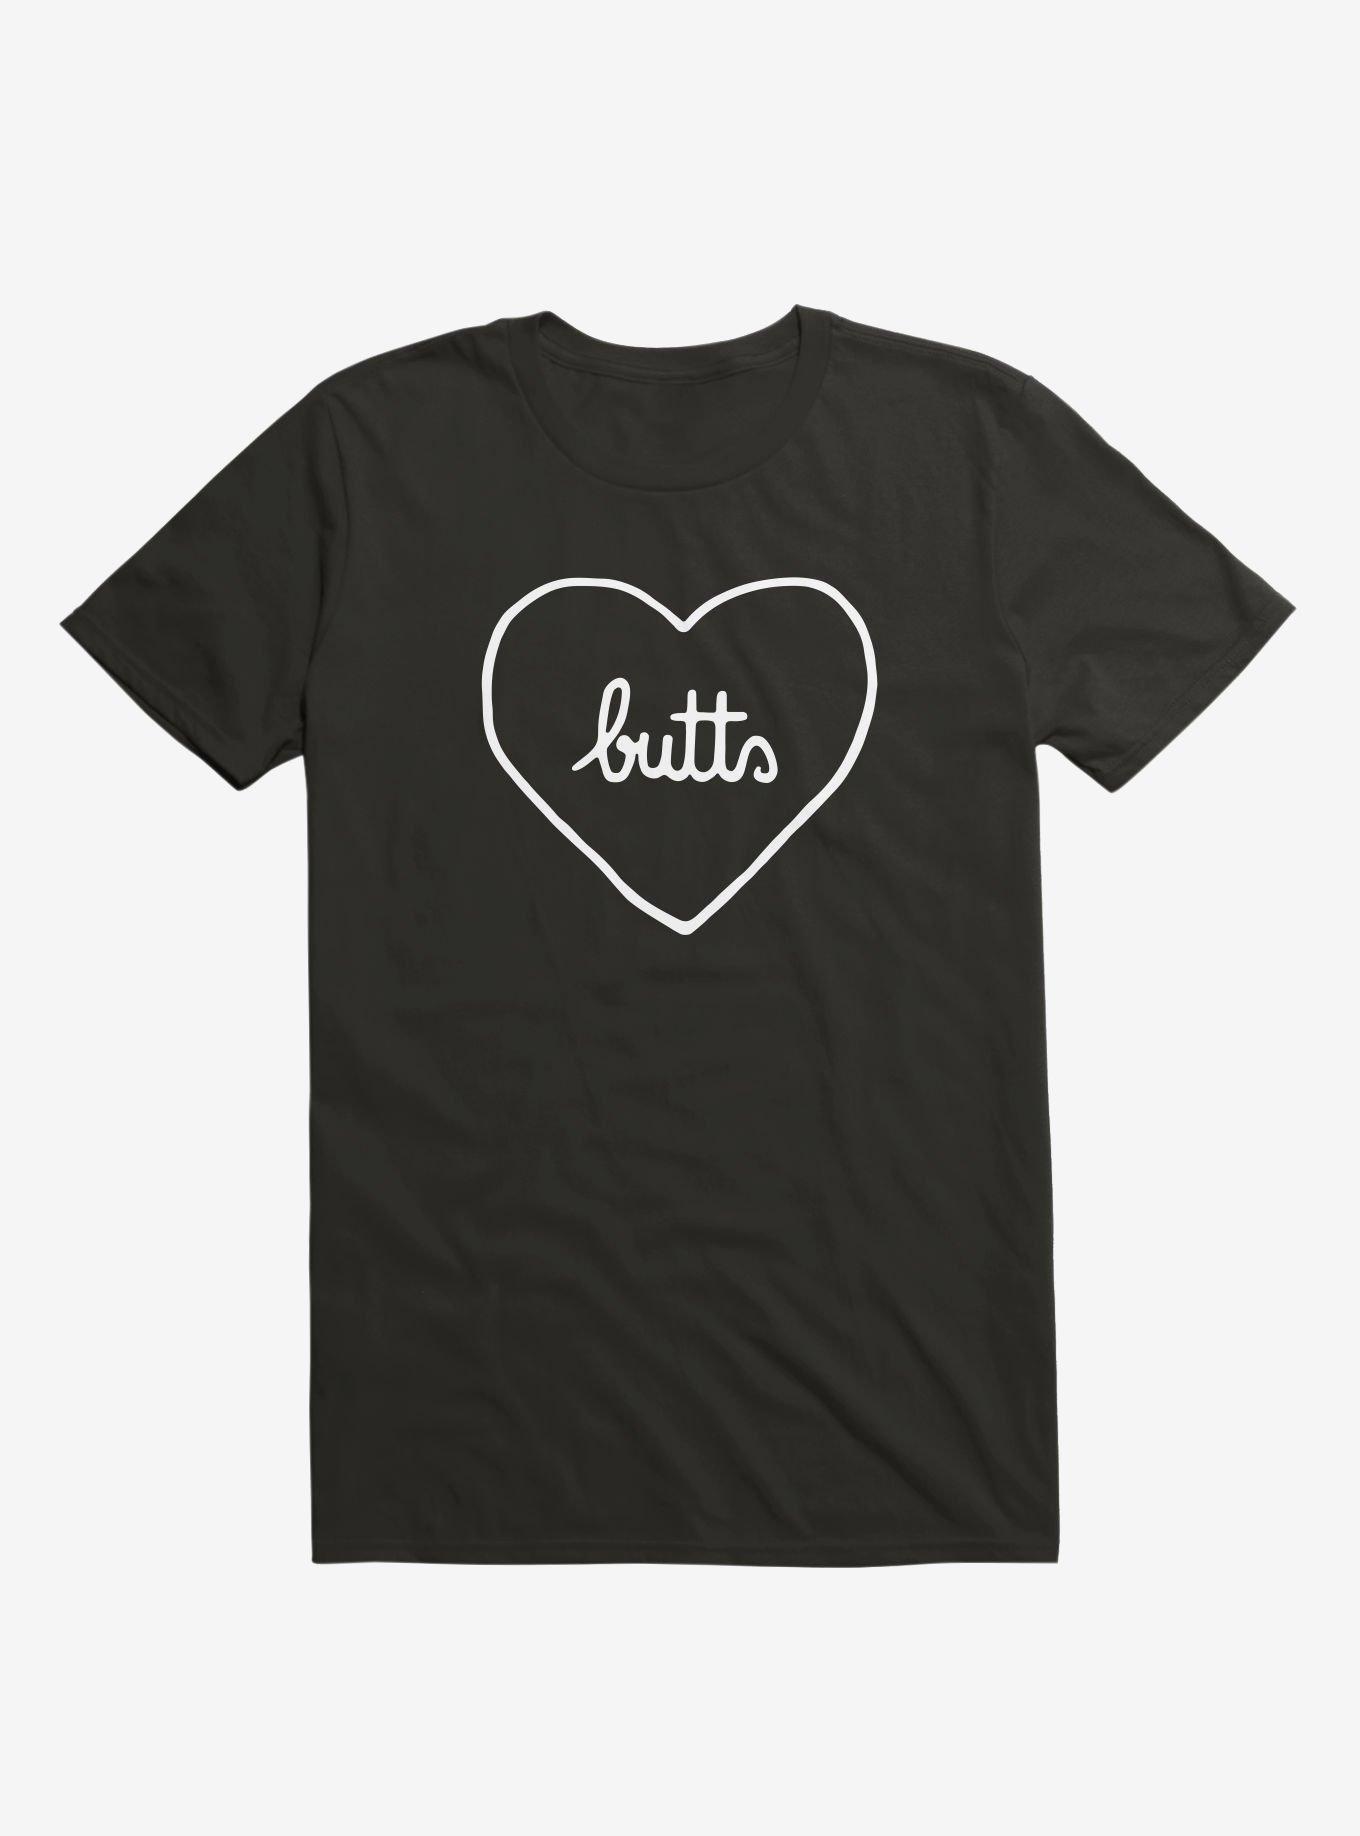 Love Your Butts T-Shirt, BLACK, hi-res